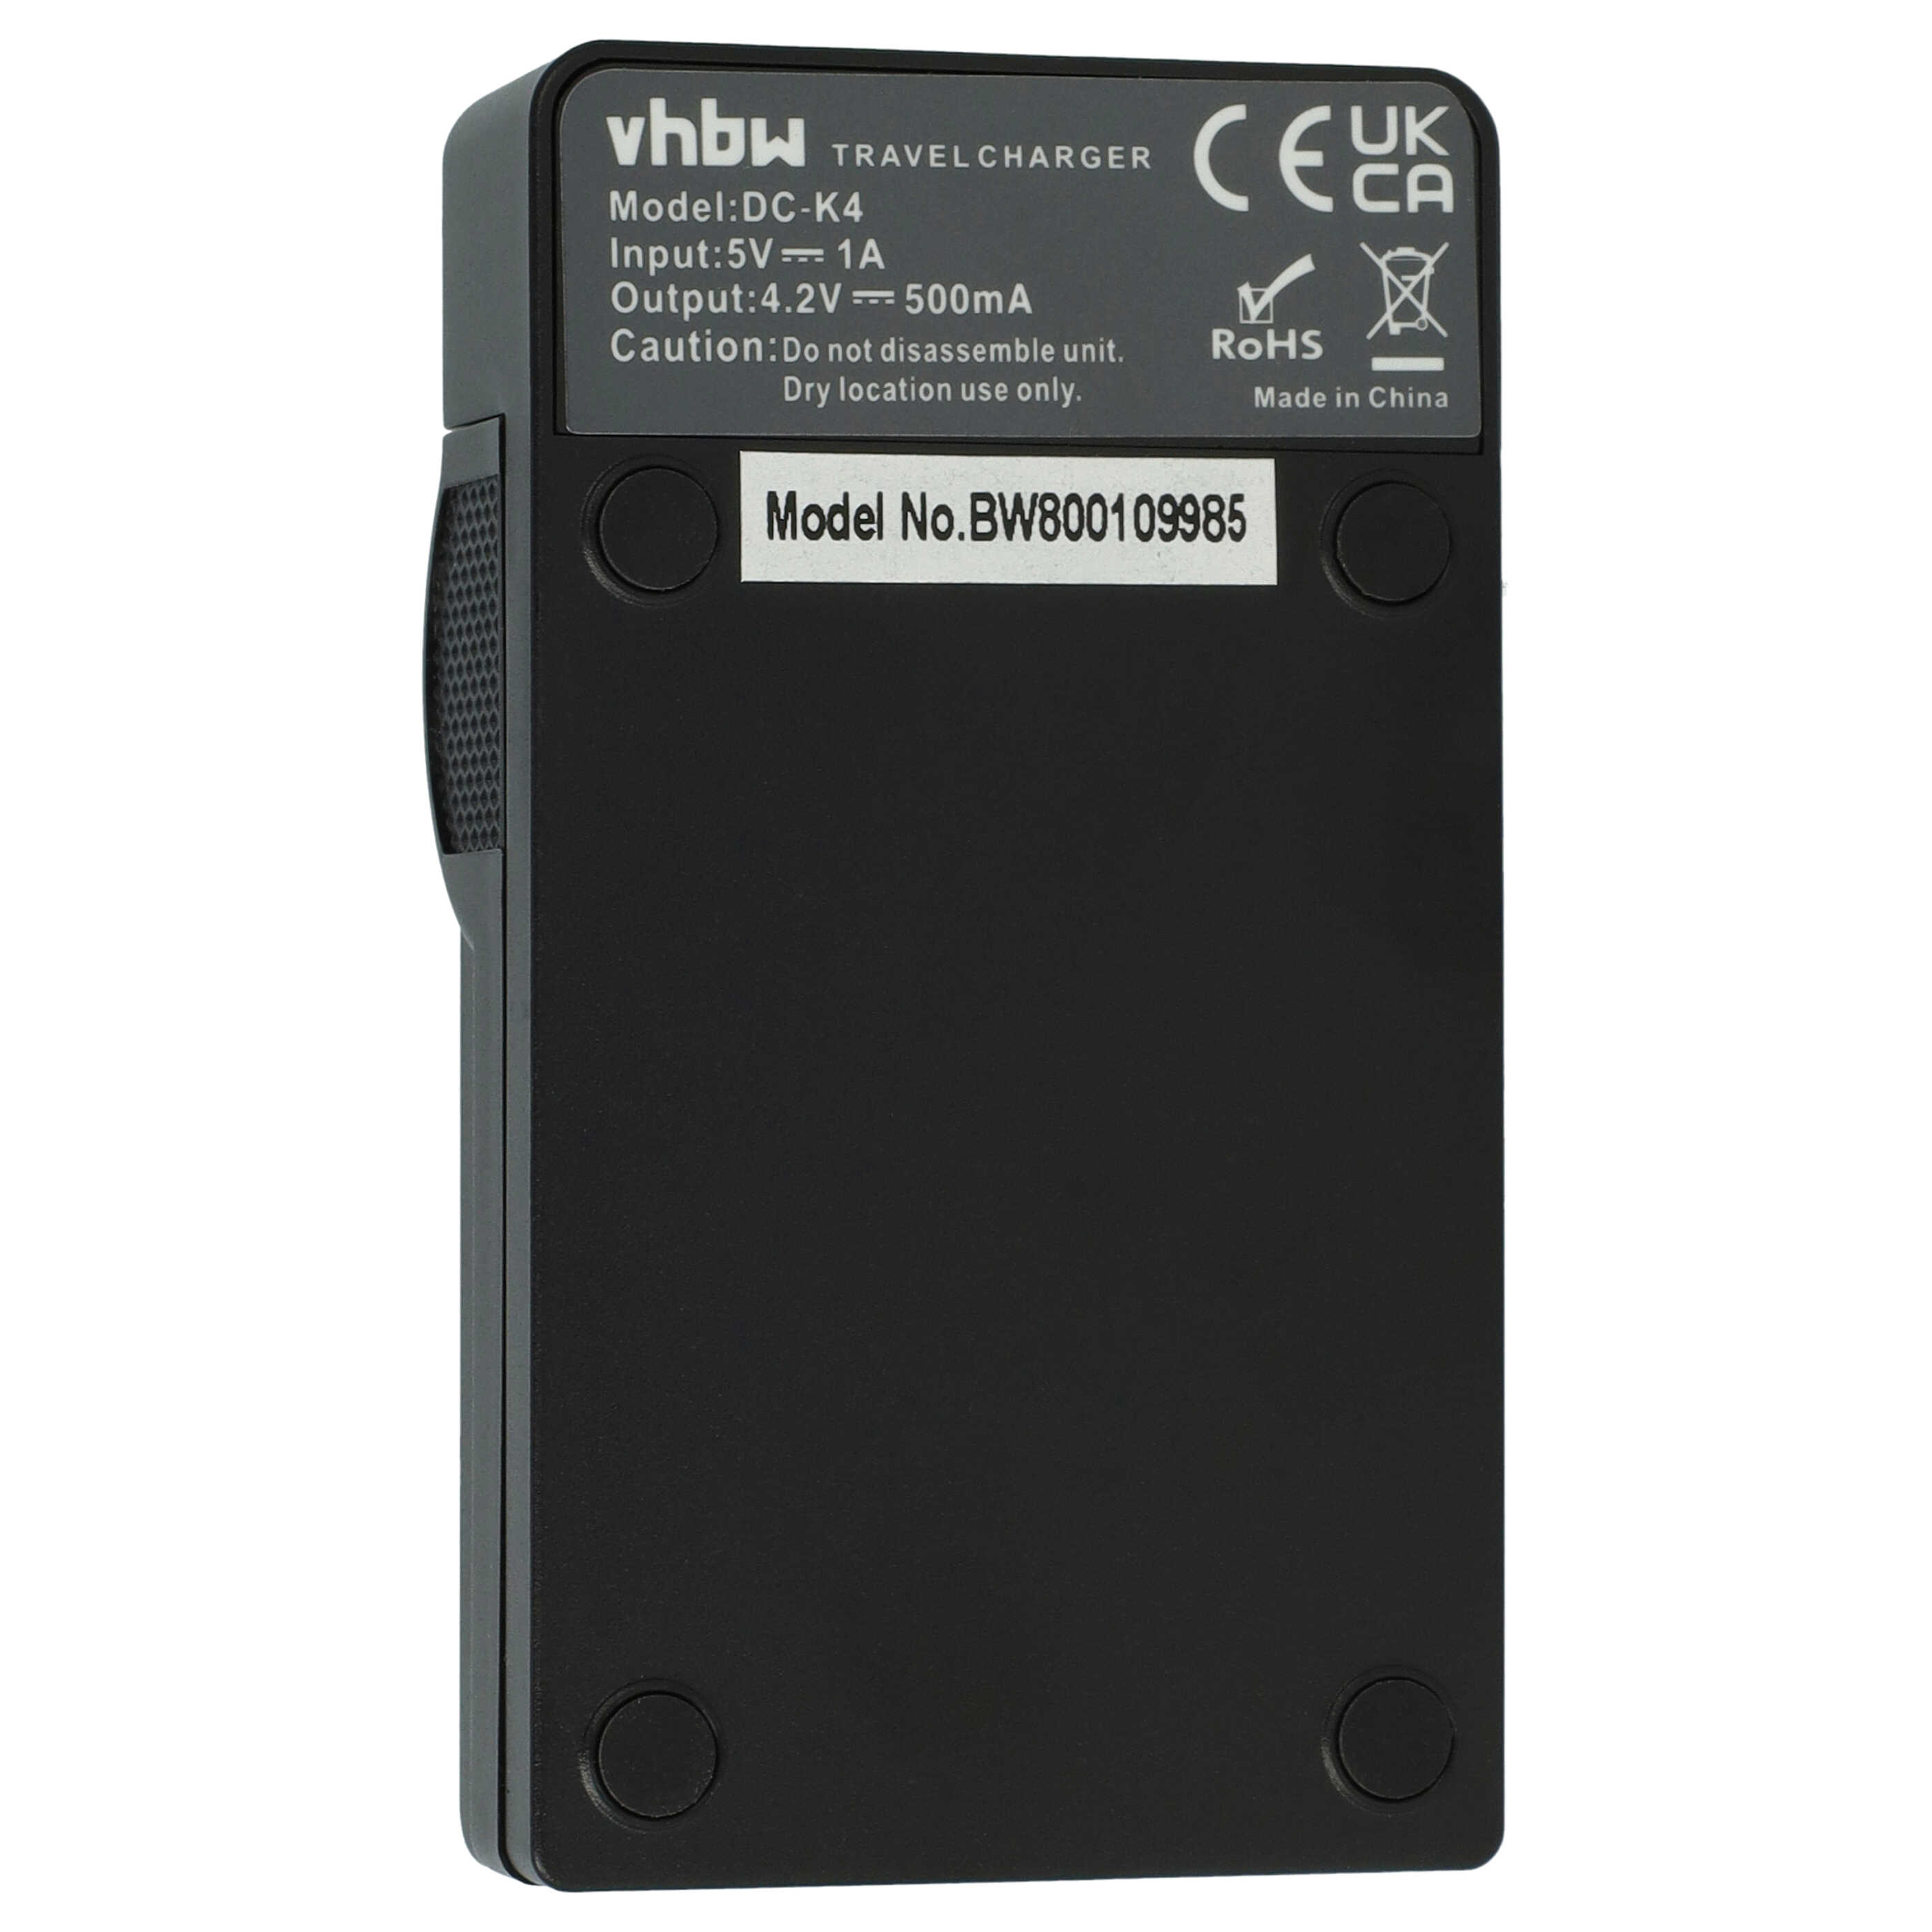 Battery Charger suitable for Lumix DMC-FT7 Camera etc. - 0.5 A, 4.2 V